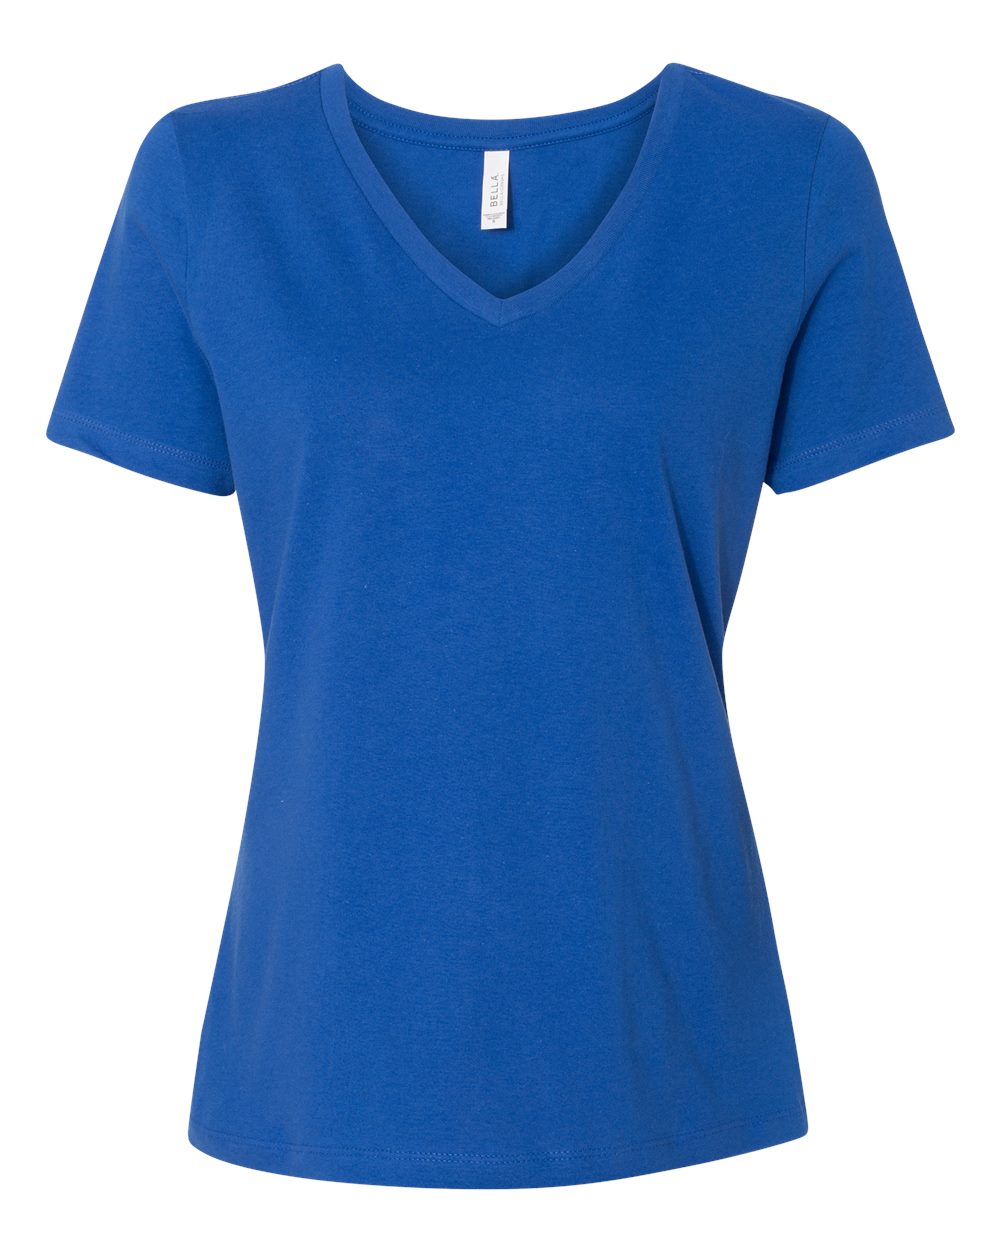 bella+canvas womens relaxed v-neck tee true royal